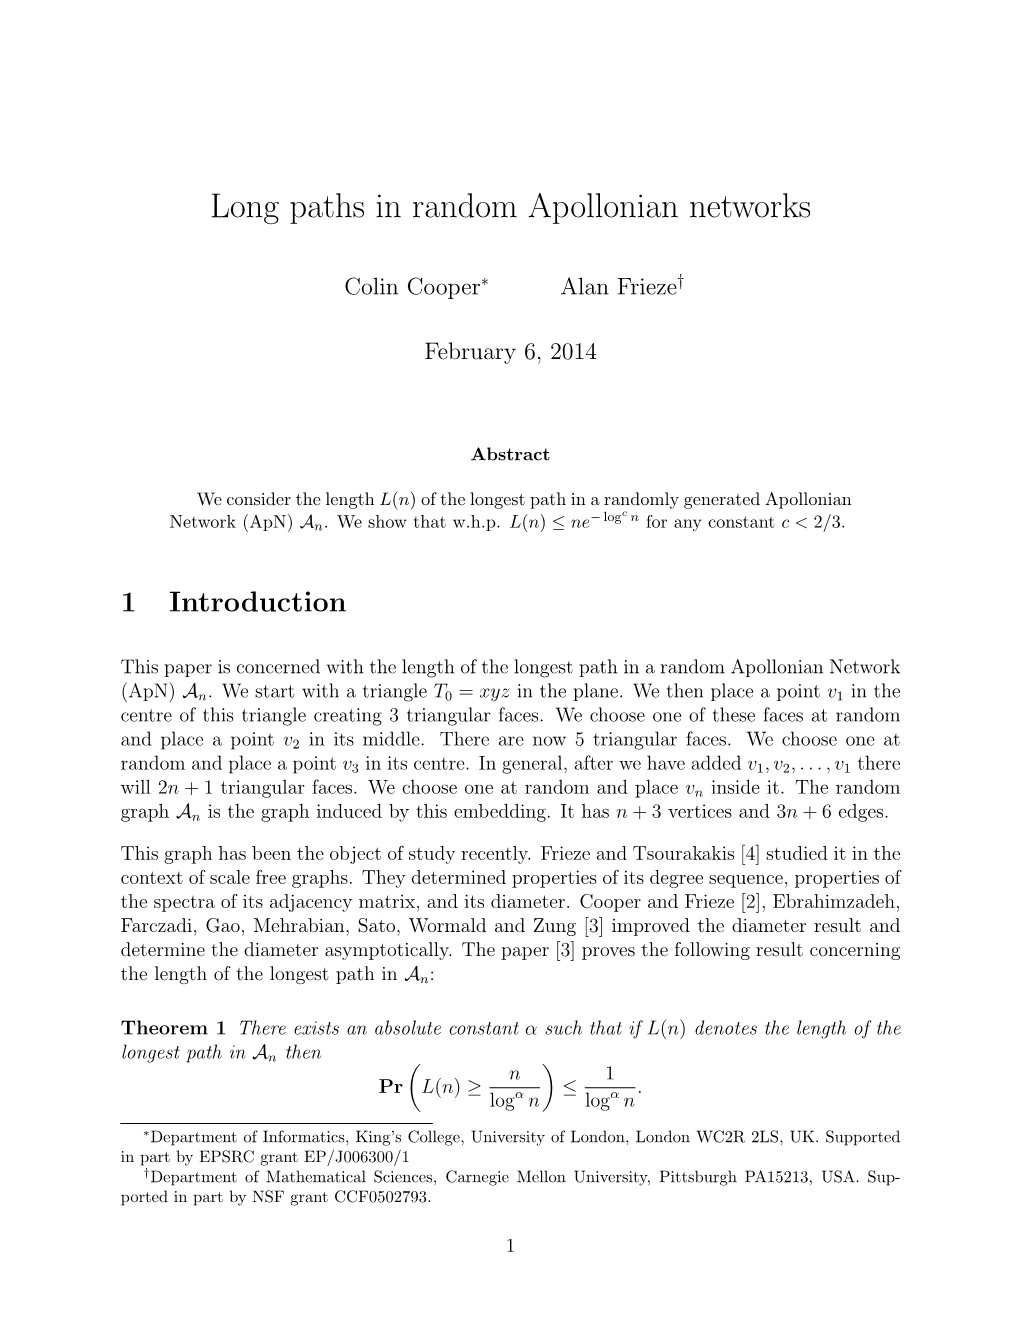 Long Paths in Random Apollonian Networks